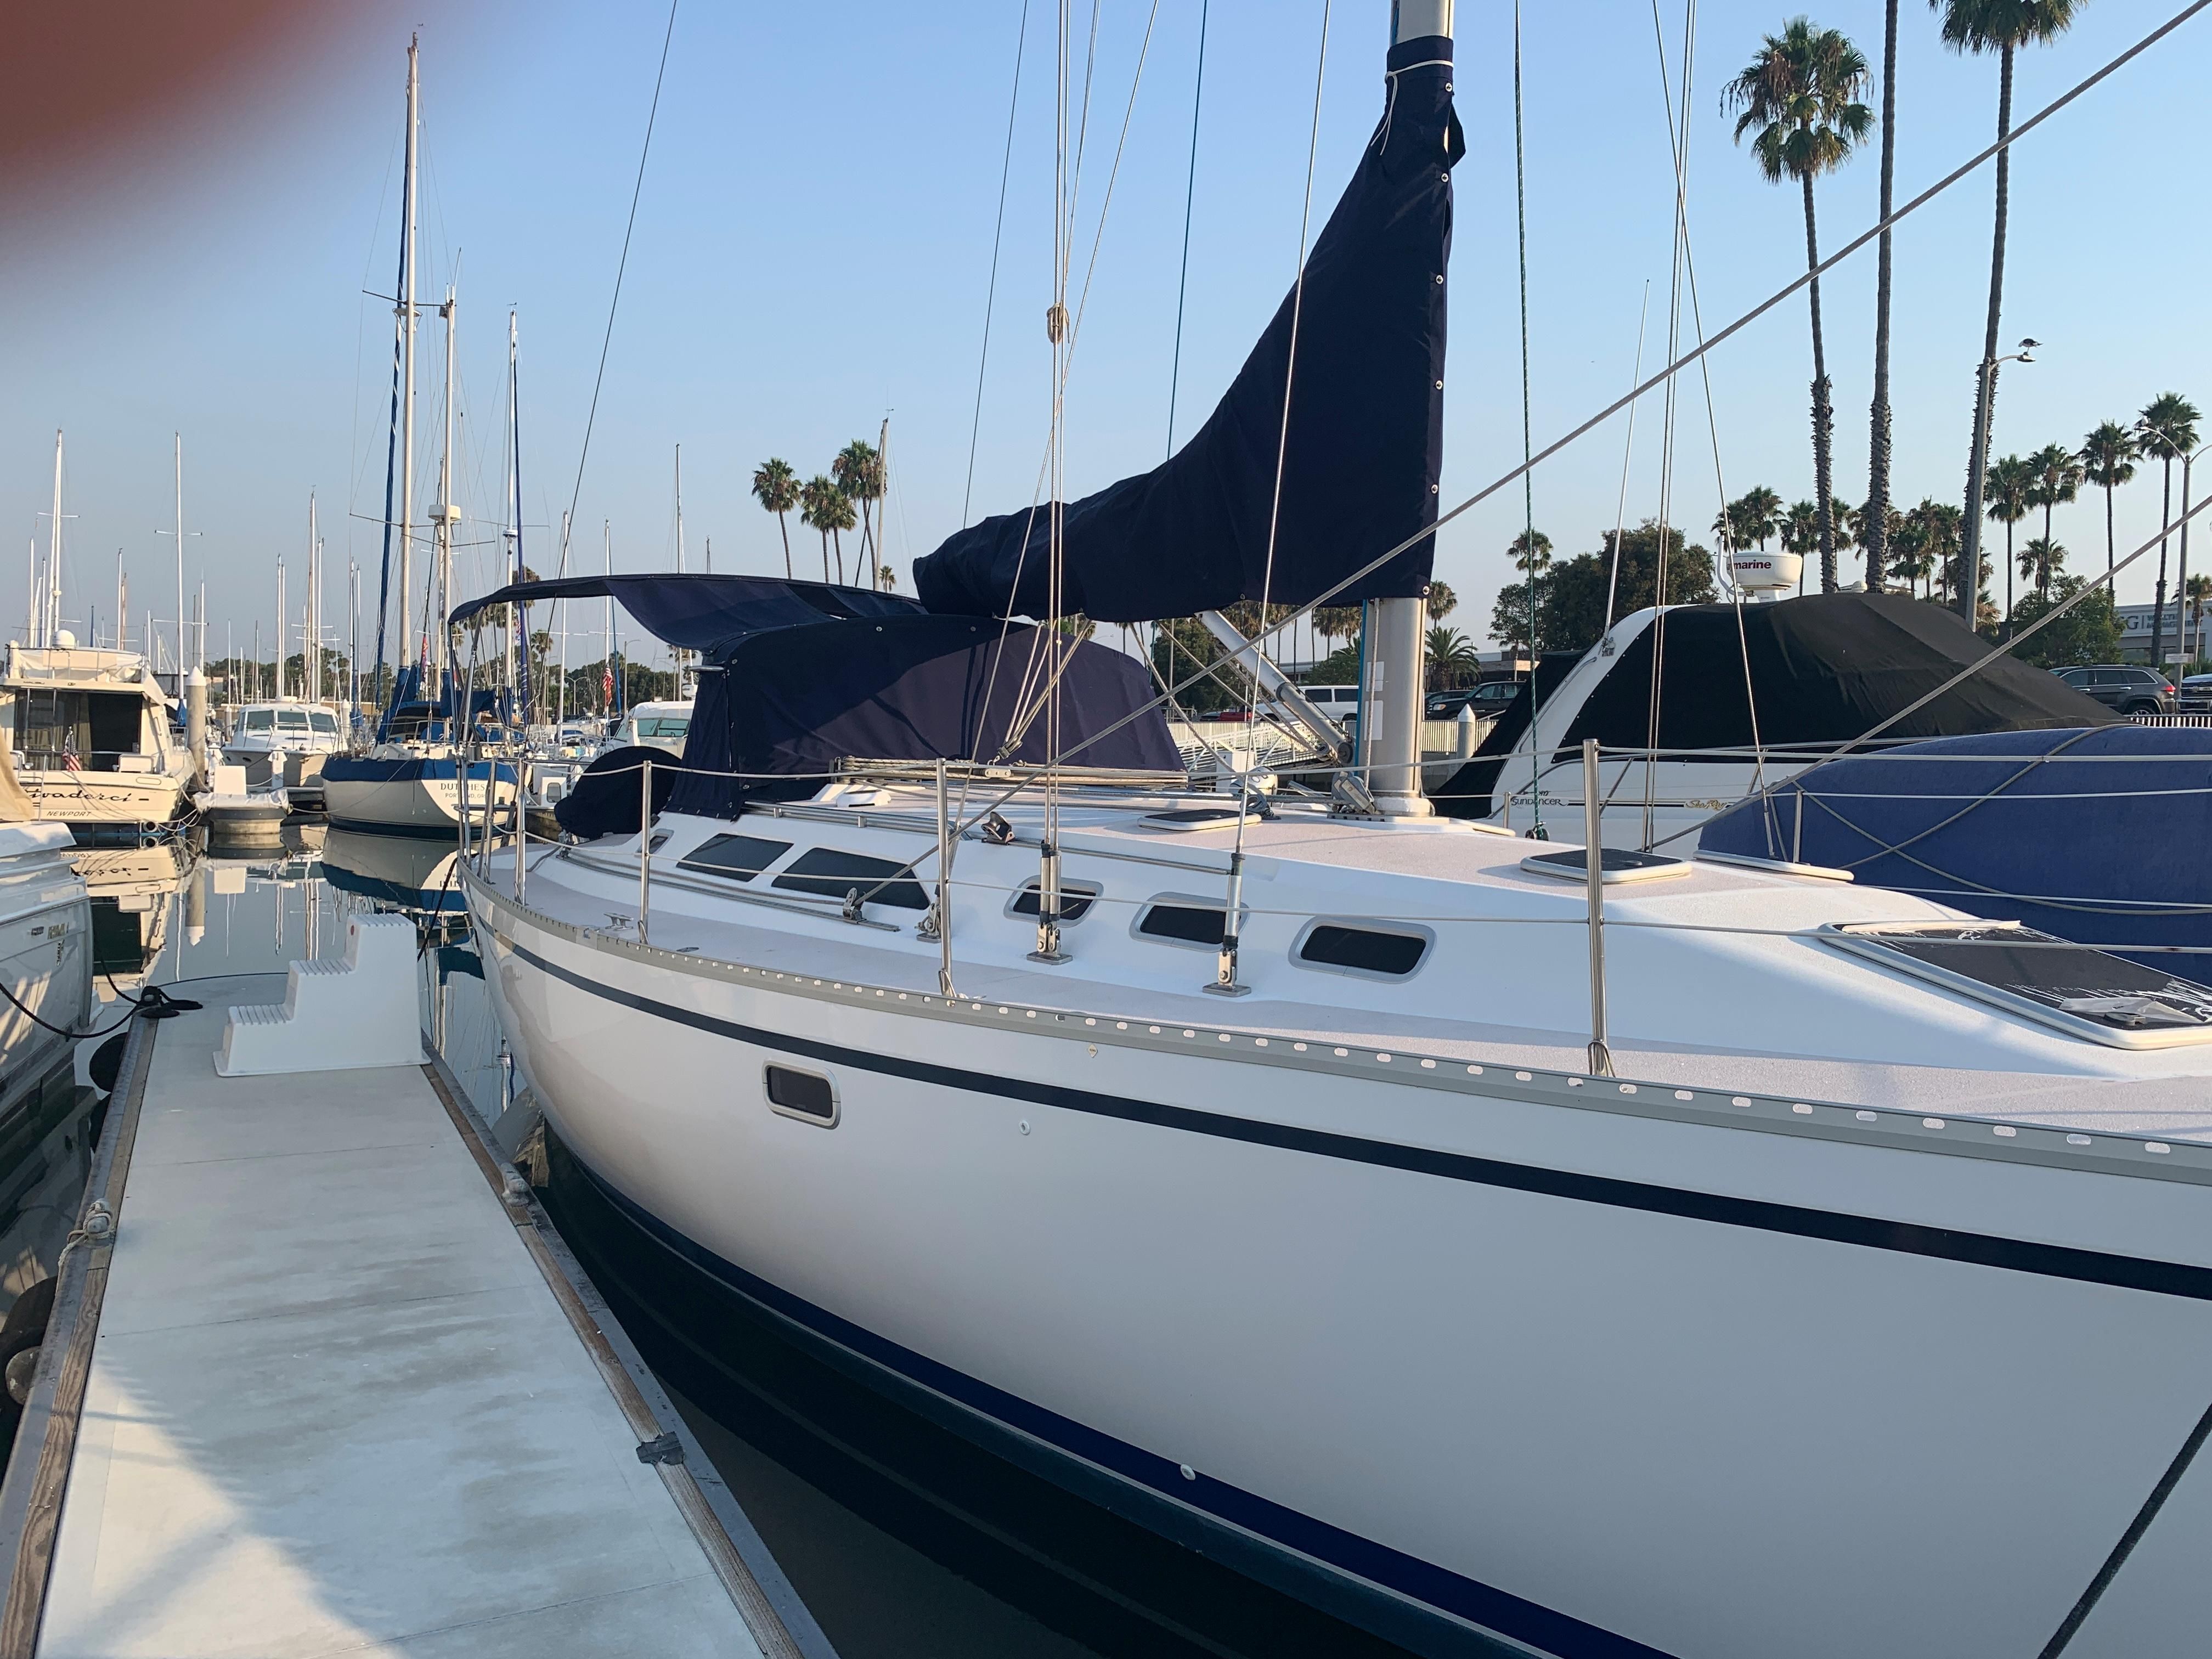 2006 Used Catalina 400 MkII Sloop Sailboat For Sale 